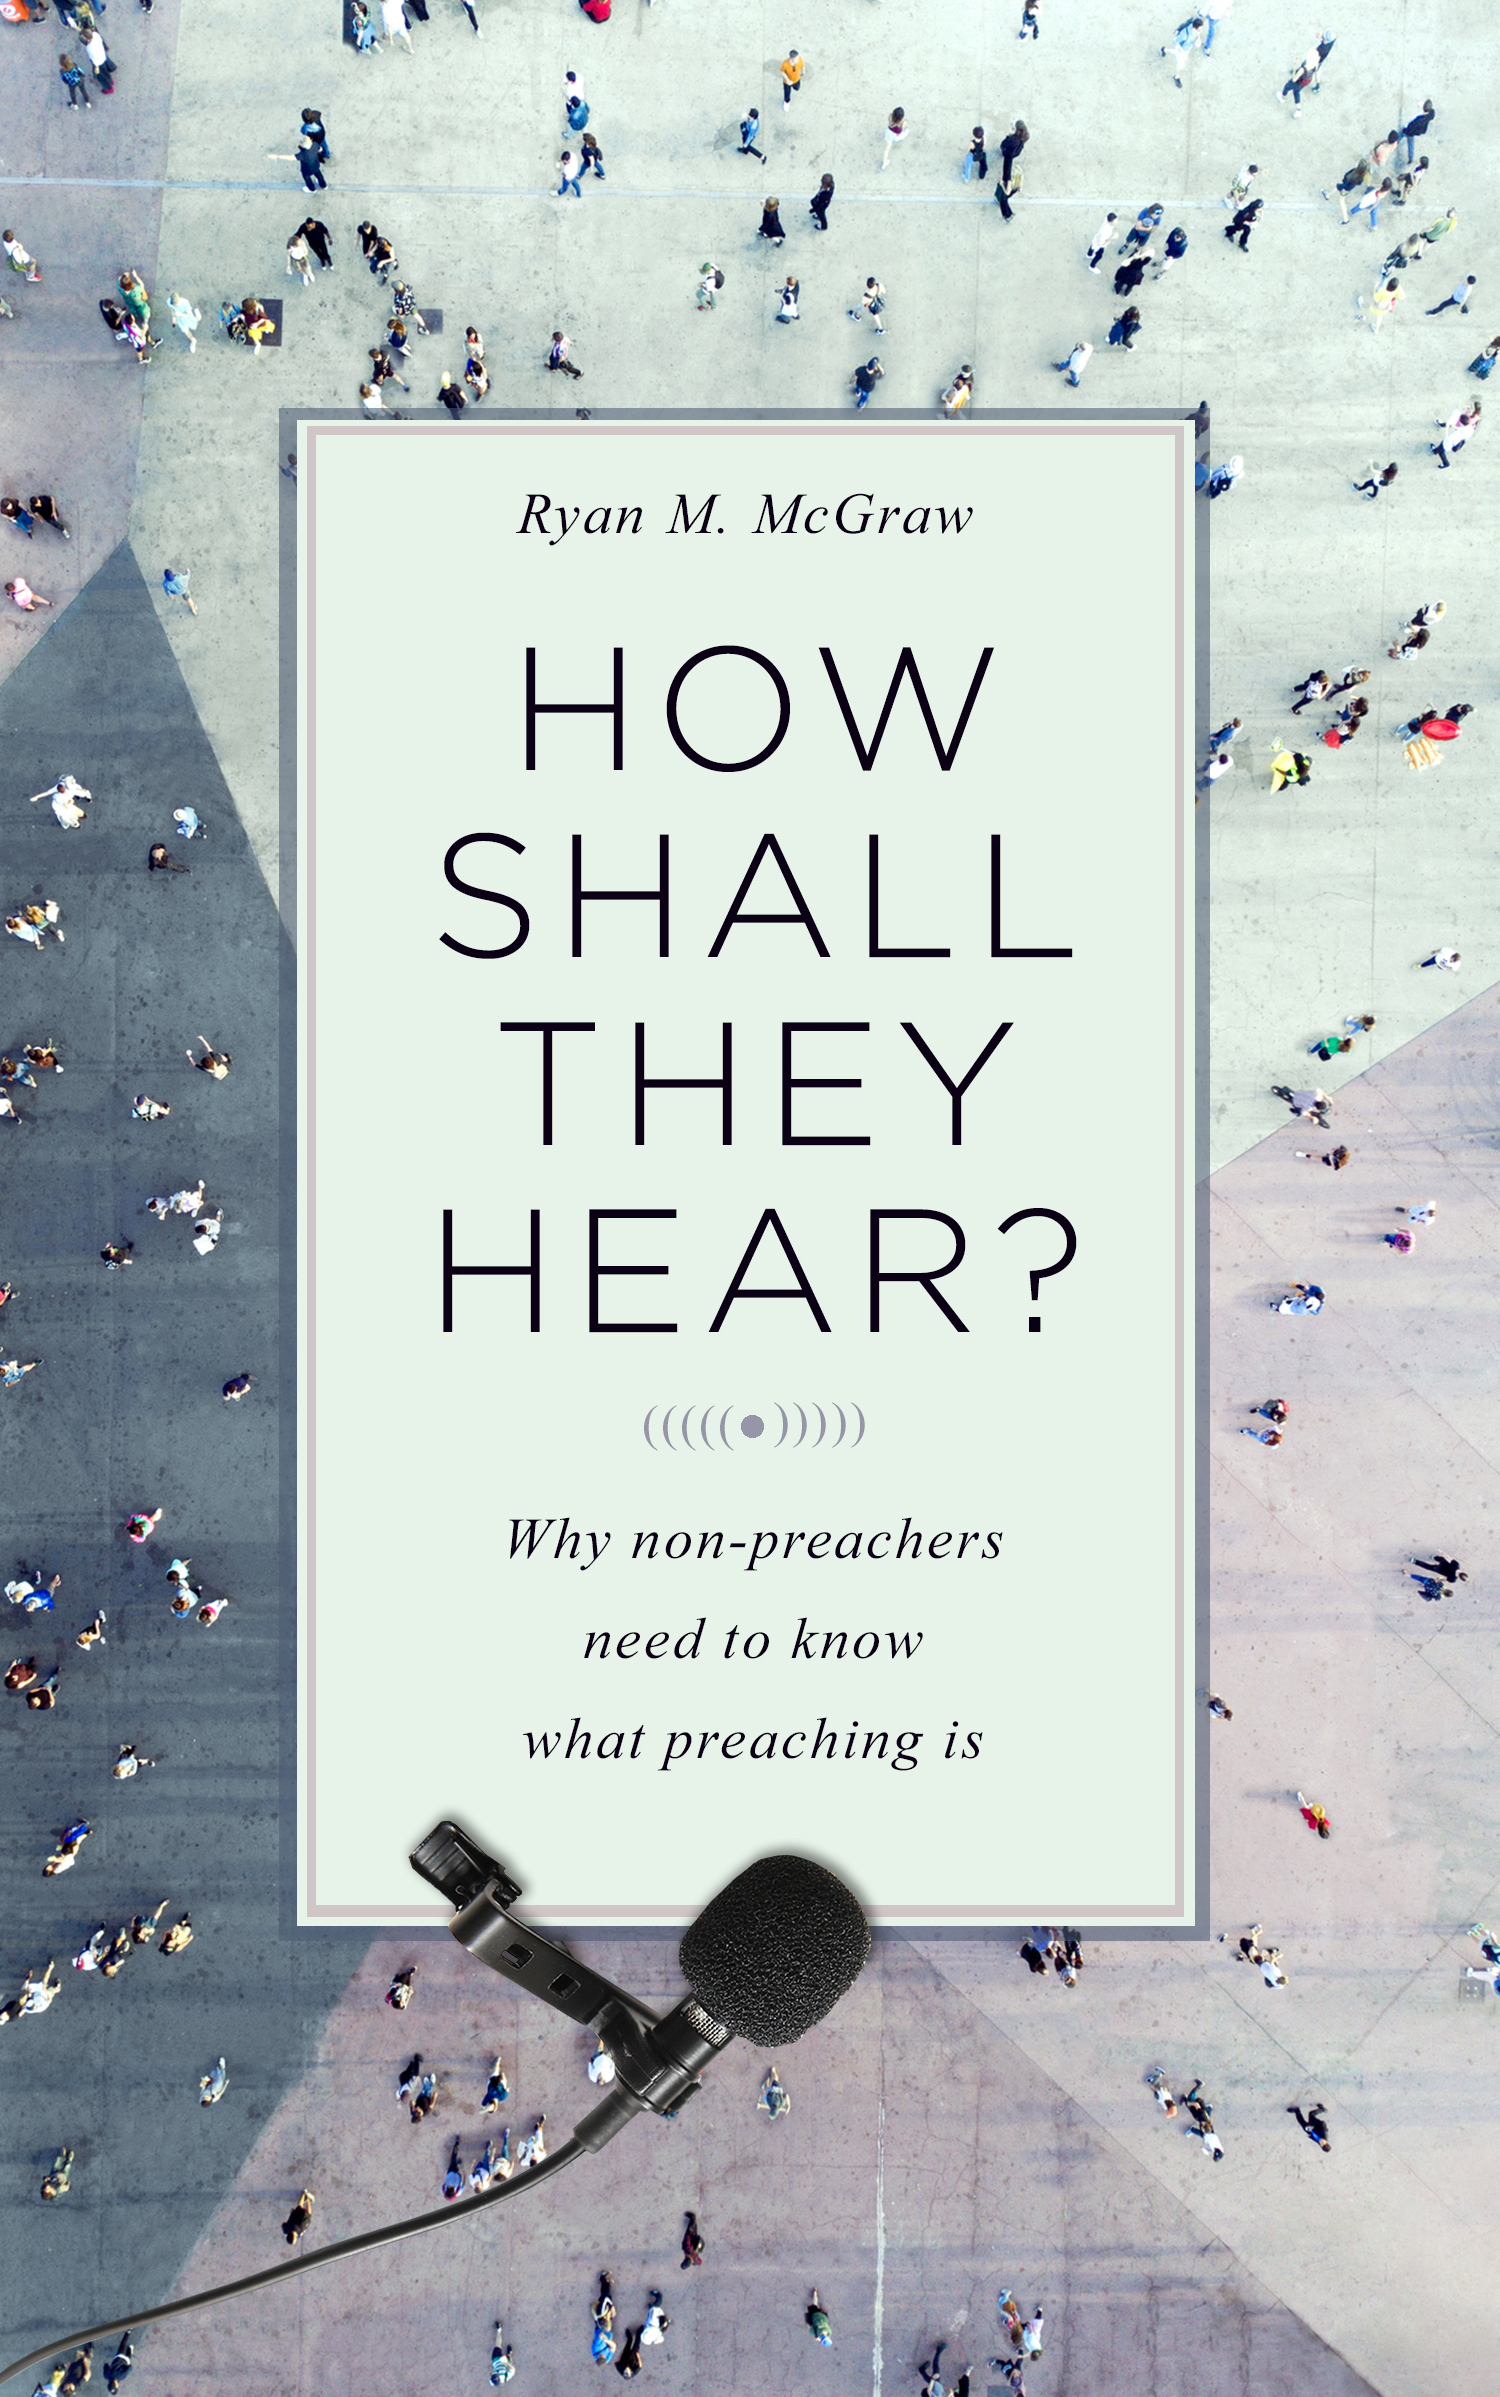 Book Notice: HOW SHALL THEY HEAR? WHY NON-PREACHERS NEED TO KNOW WHAT PREACHING IS, by Ryan M. McGraw